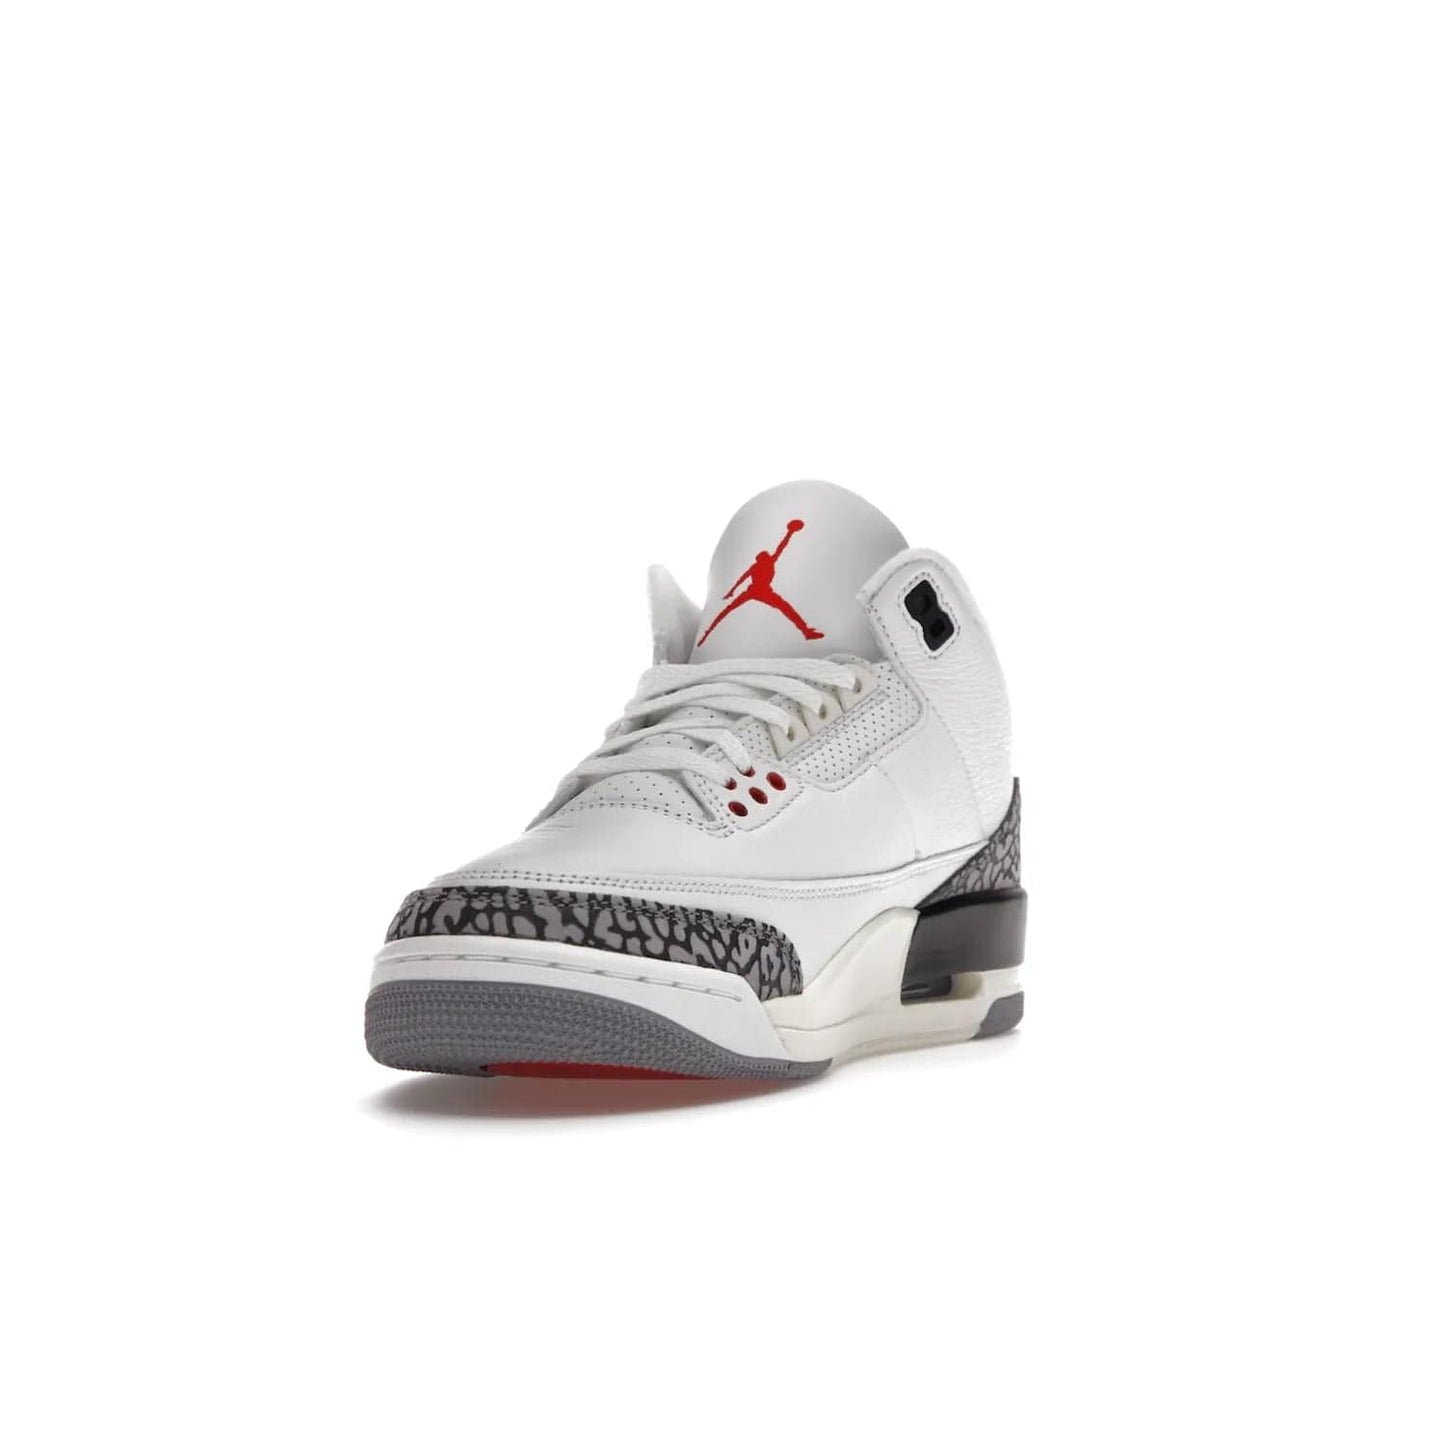 Jordan 3 Retro White Cement Reimagined - Image 13 - Only at www.BallersClubKickz.com - The Reimagined Air Jordan 3 Retro in a Summit White/Fire Red/Black/Cement Grey colorway is launching on March 11, 2023. Featuring a white leather upper, off-white midsoles and heel tabs, this vintage-look sneaker is a must-have.